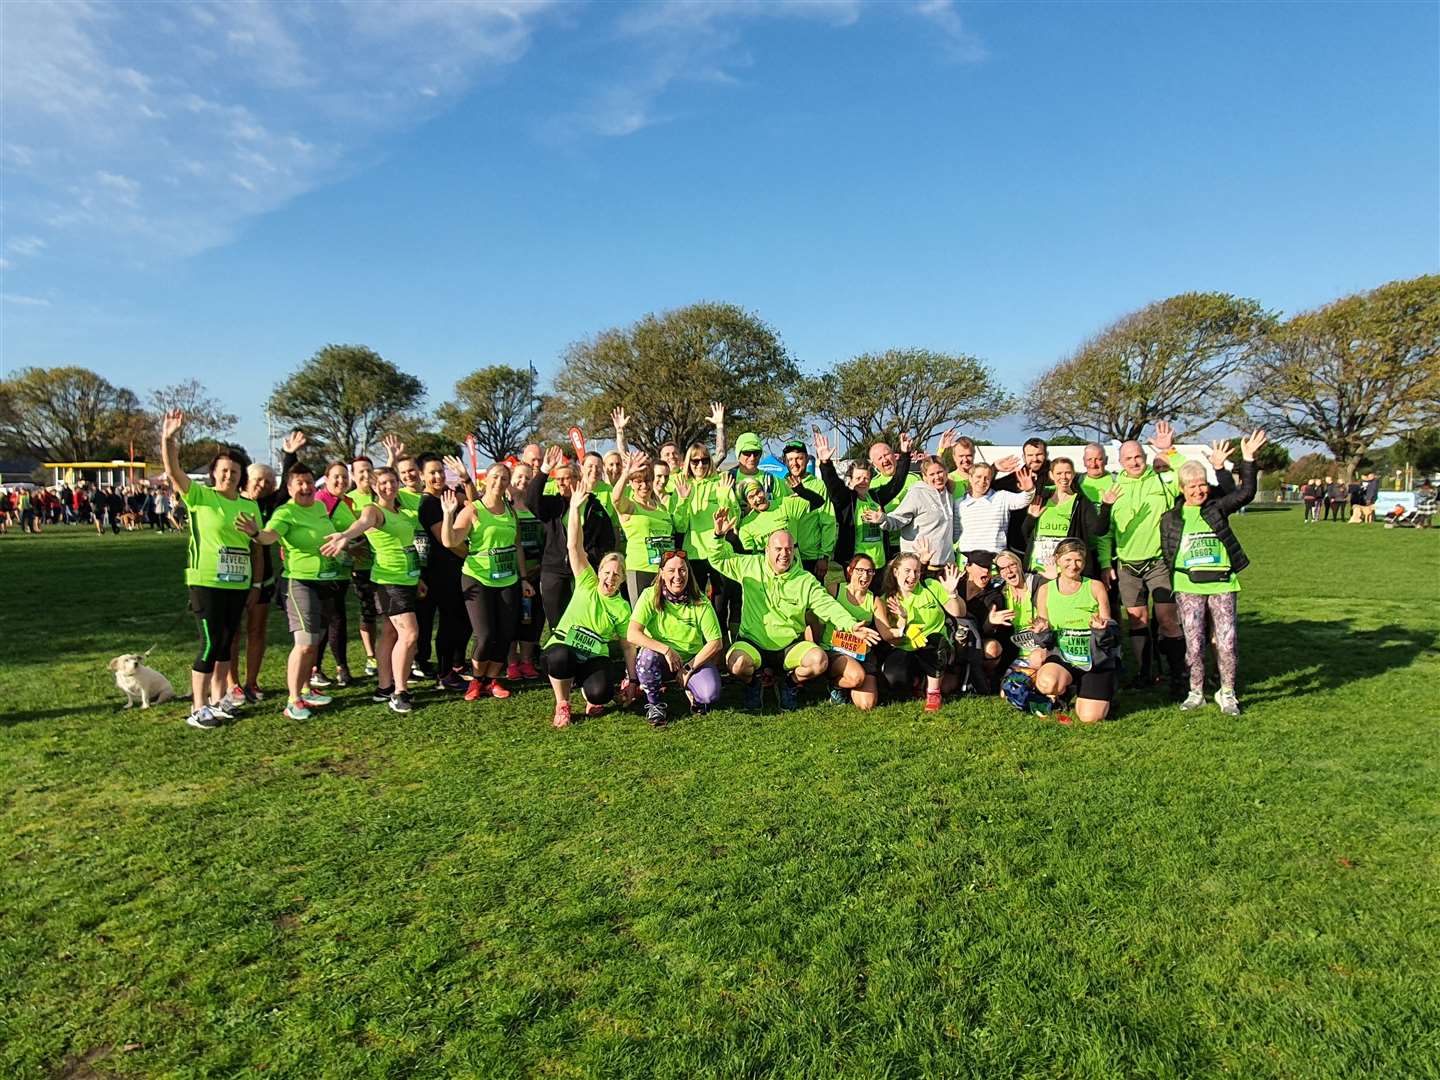 Beginners2Runners have grown to big numbers since Steve Grantham first launched the club